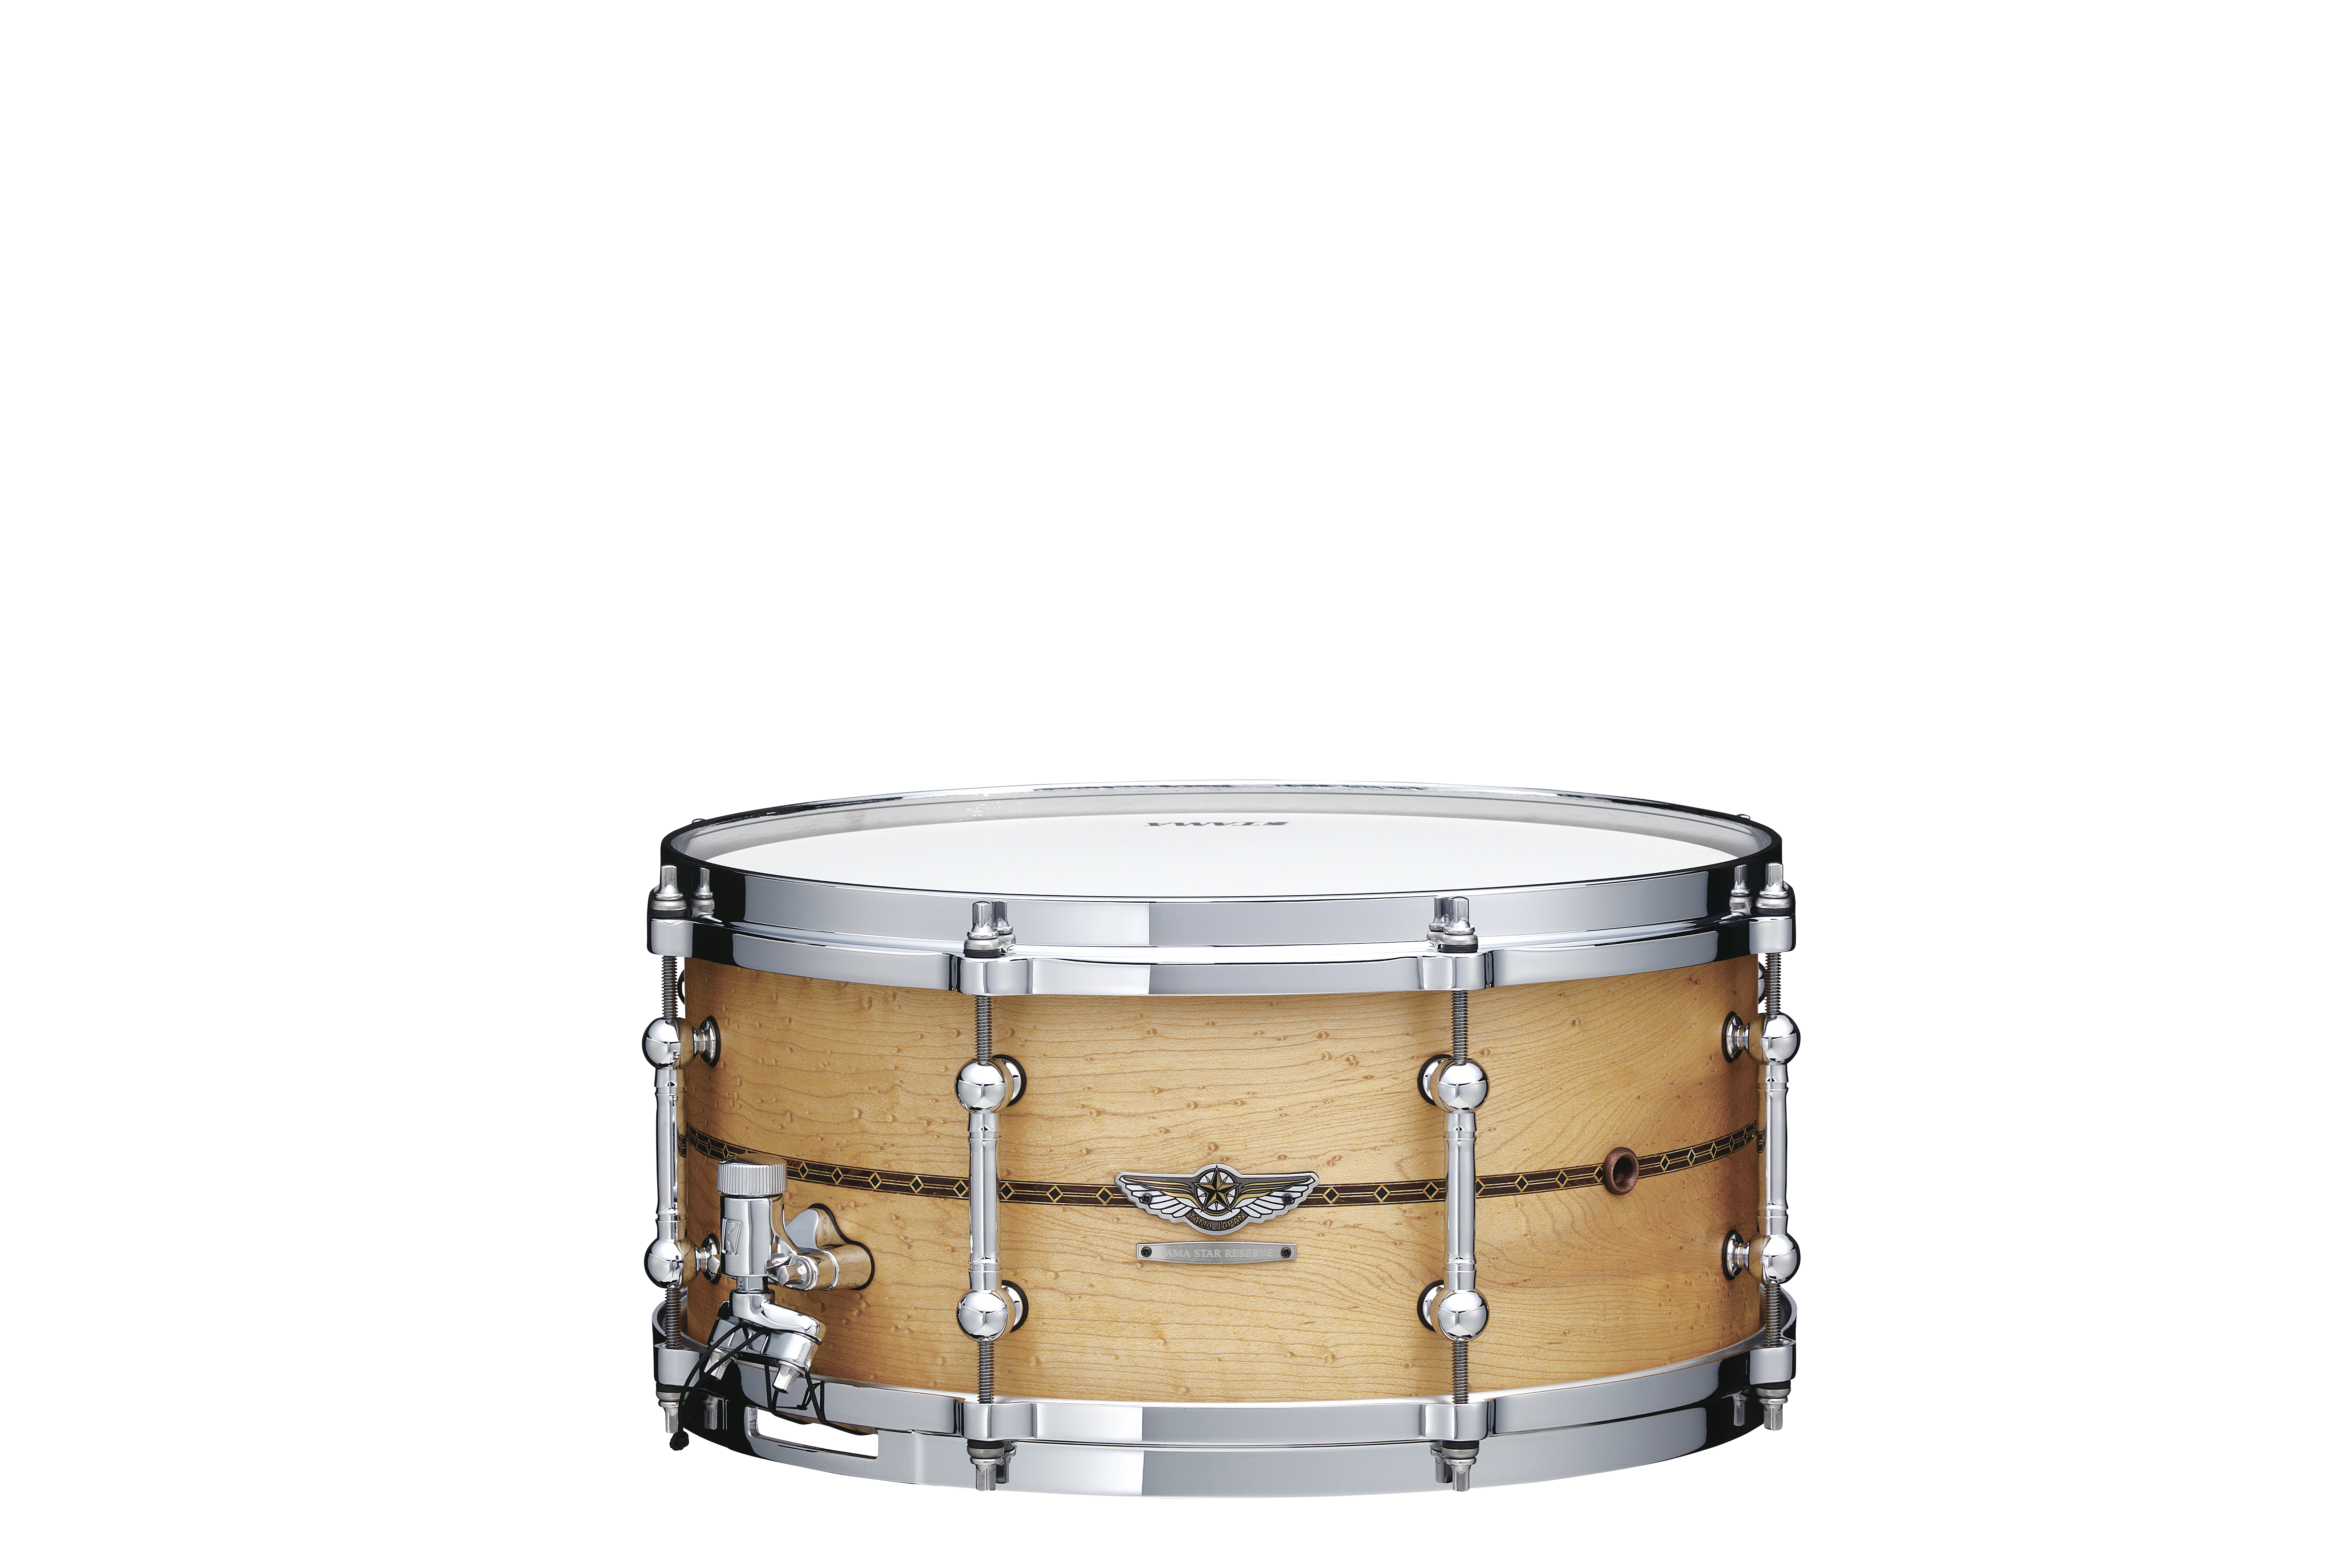 TLRBM1465SOBE STAR Reserve Snare Drum 14" x 6,5" Oiled Natural Bird´s Eye Maple